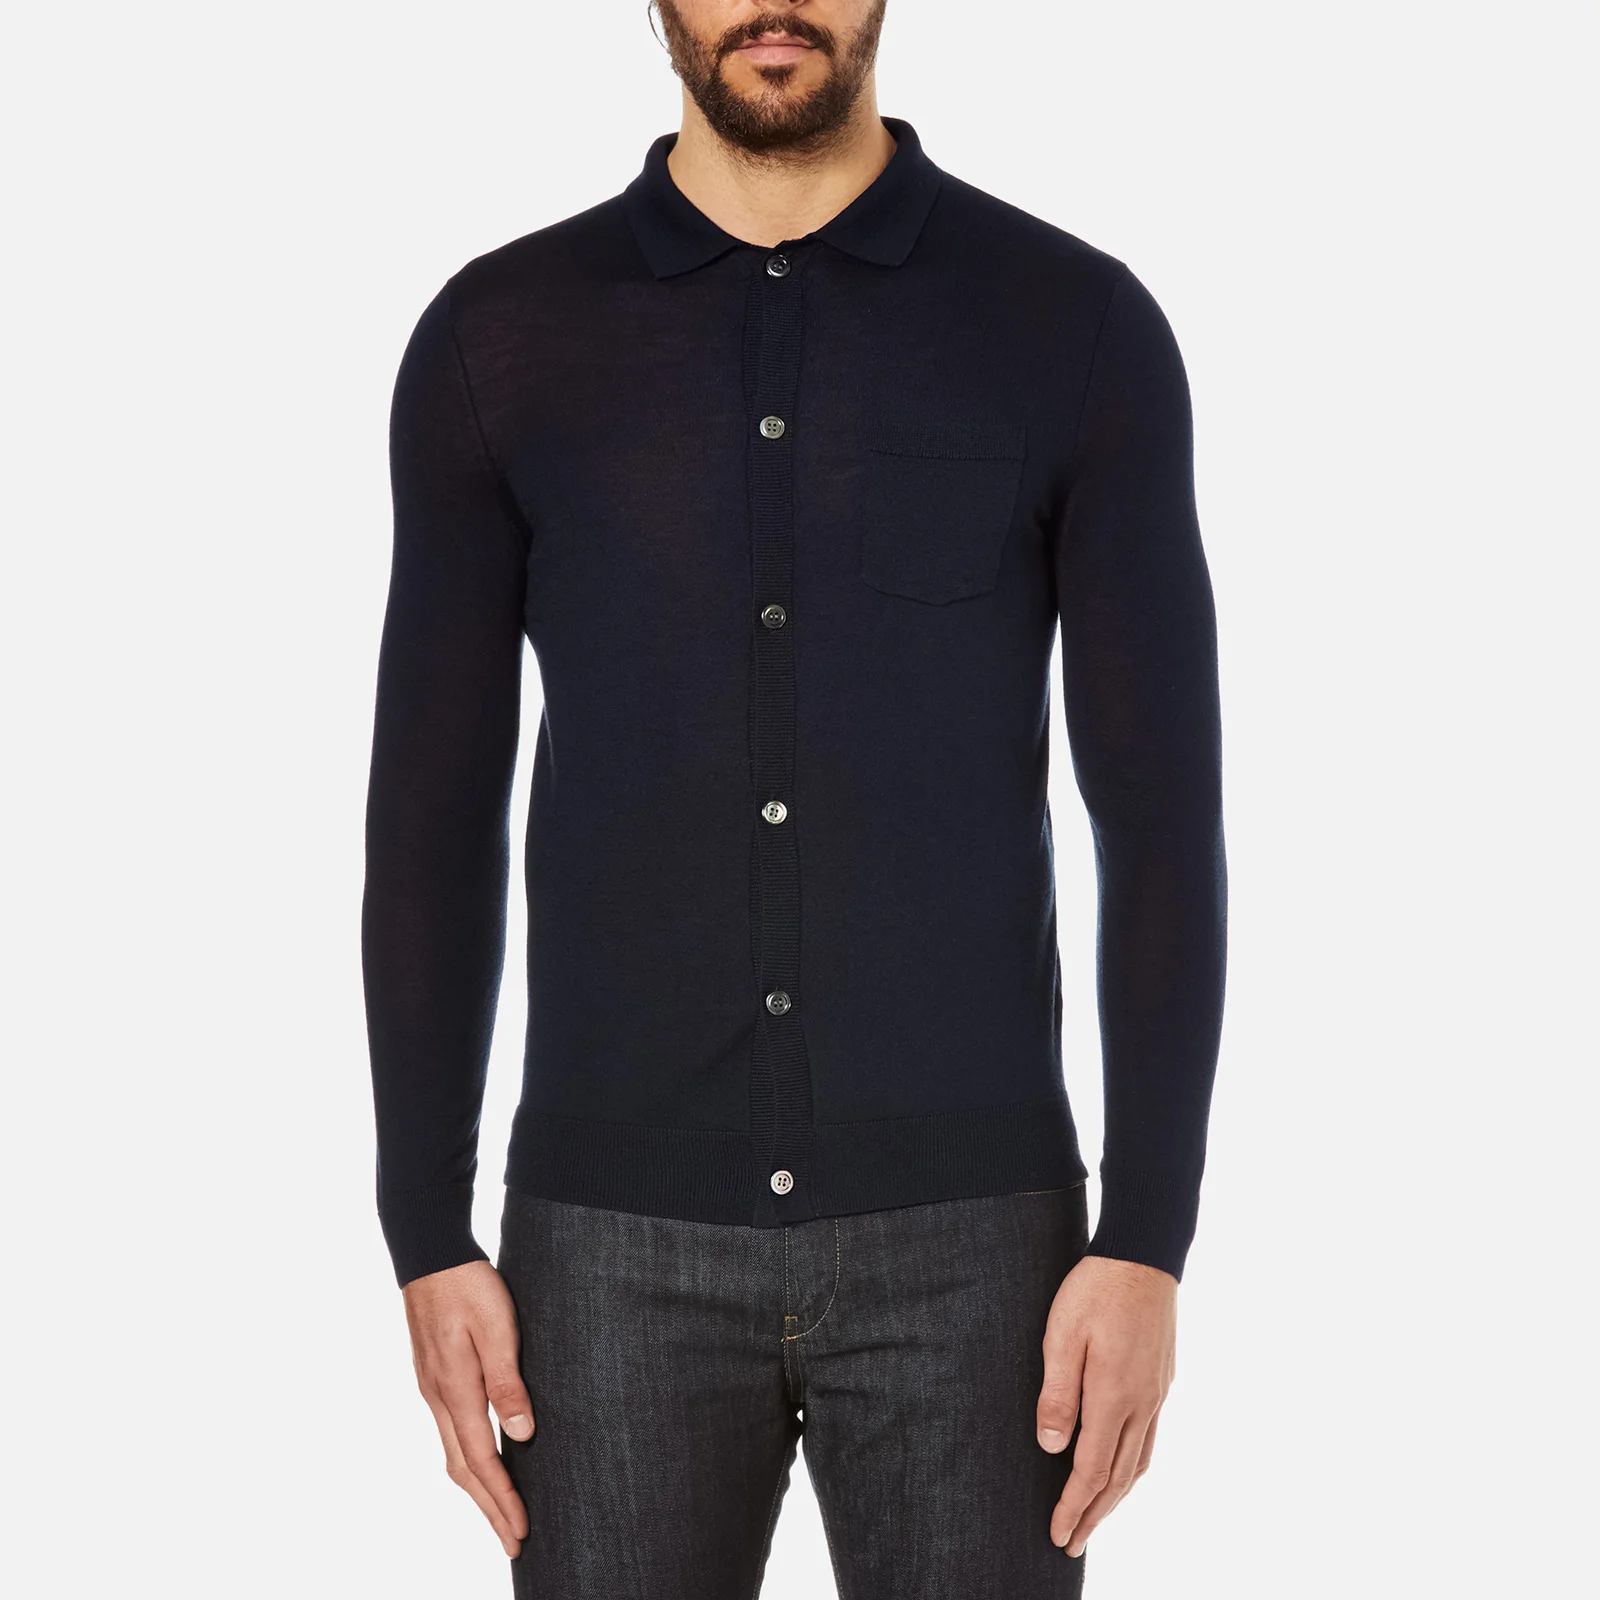 A.P.C. Men's Paolo Knitted Polo Shirt - Marine Image 1